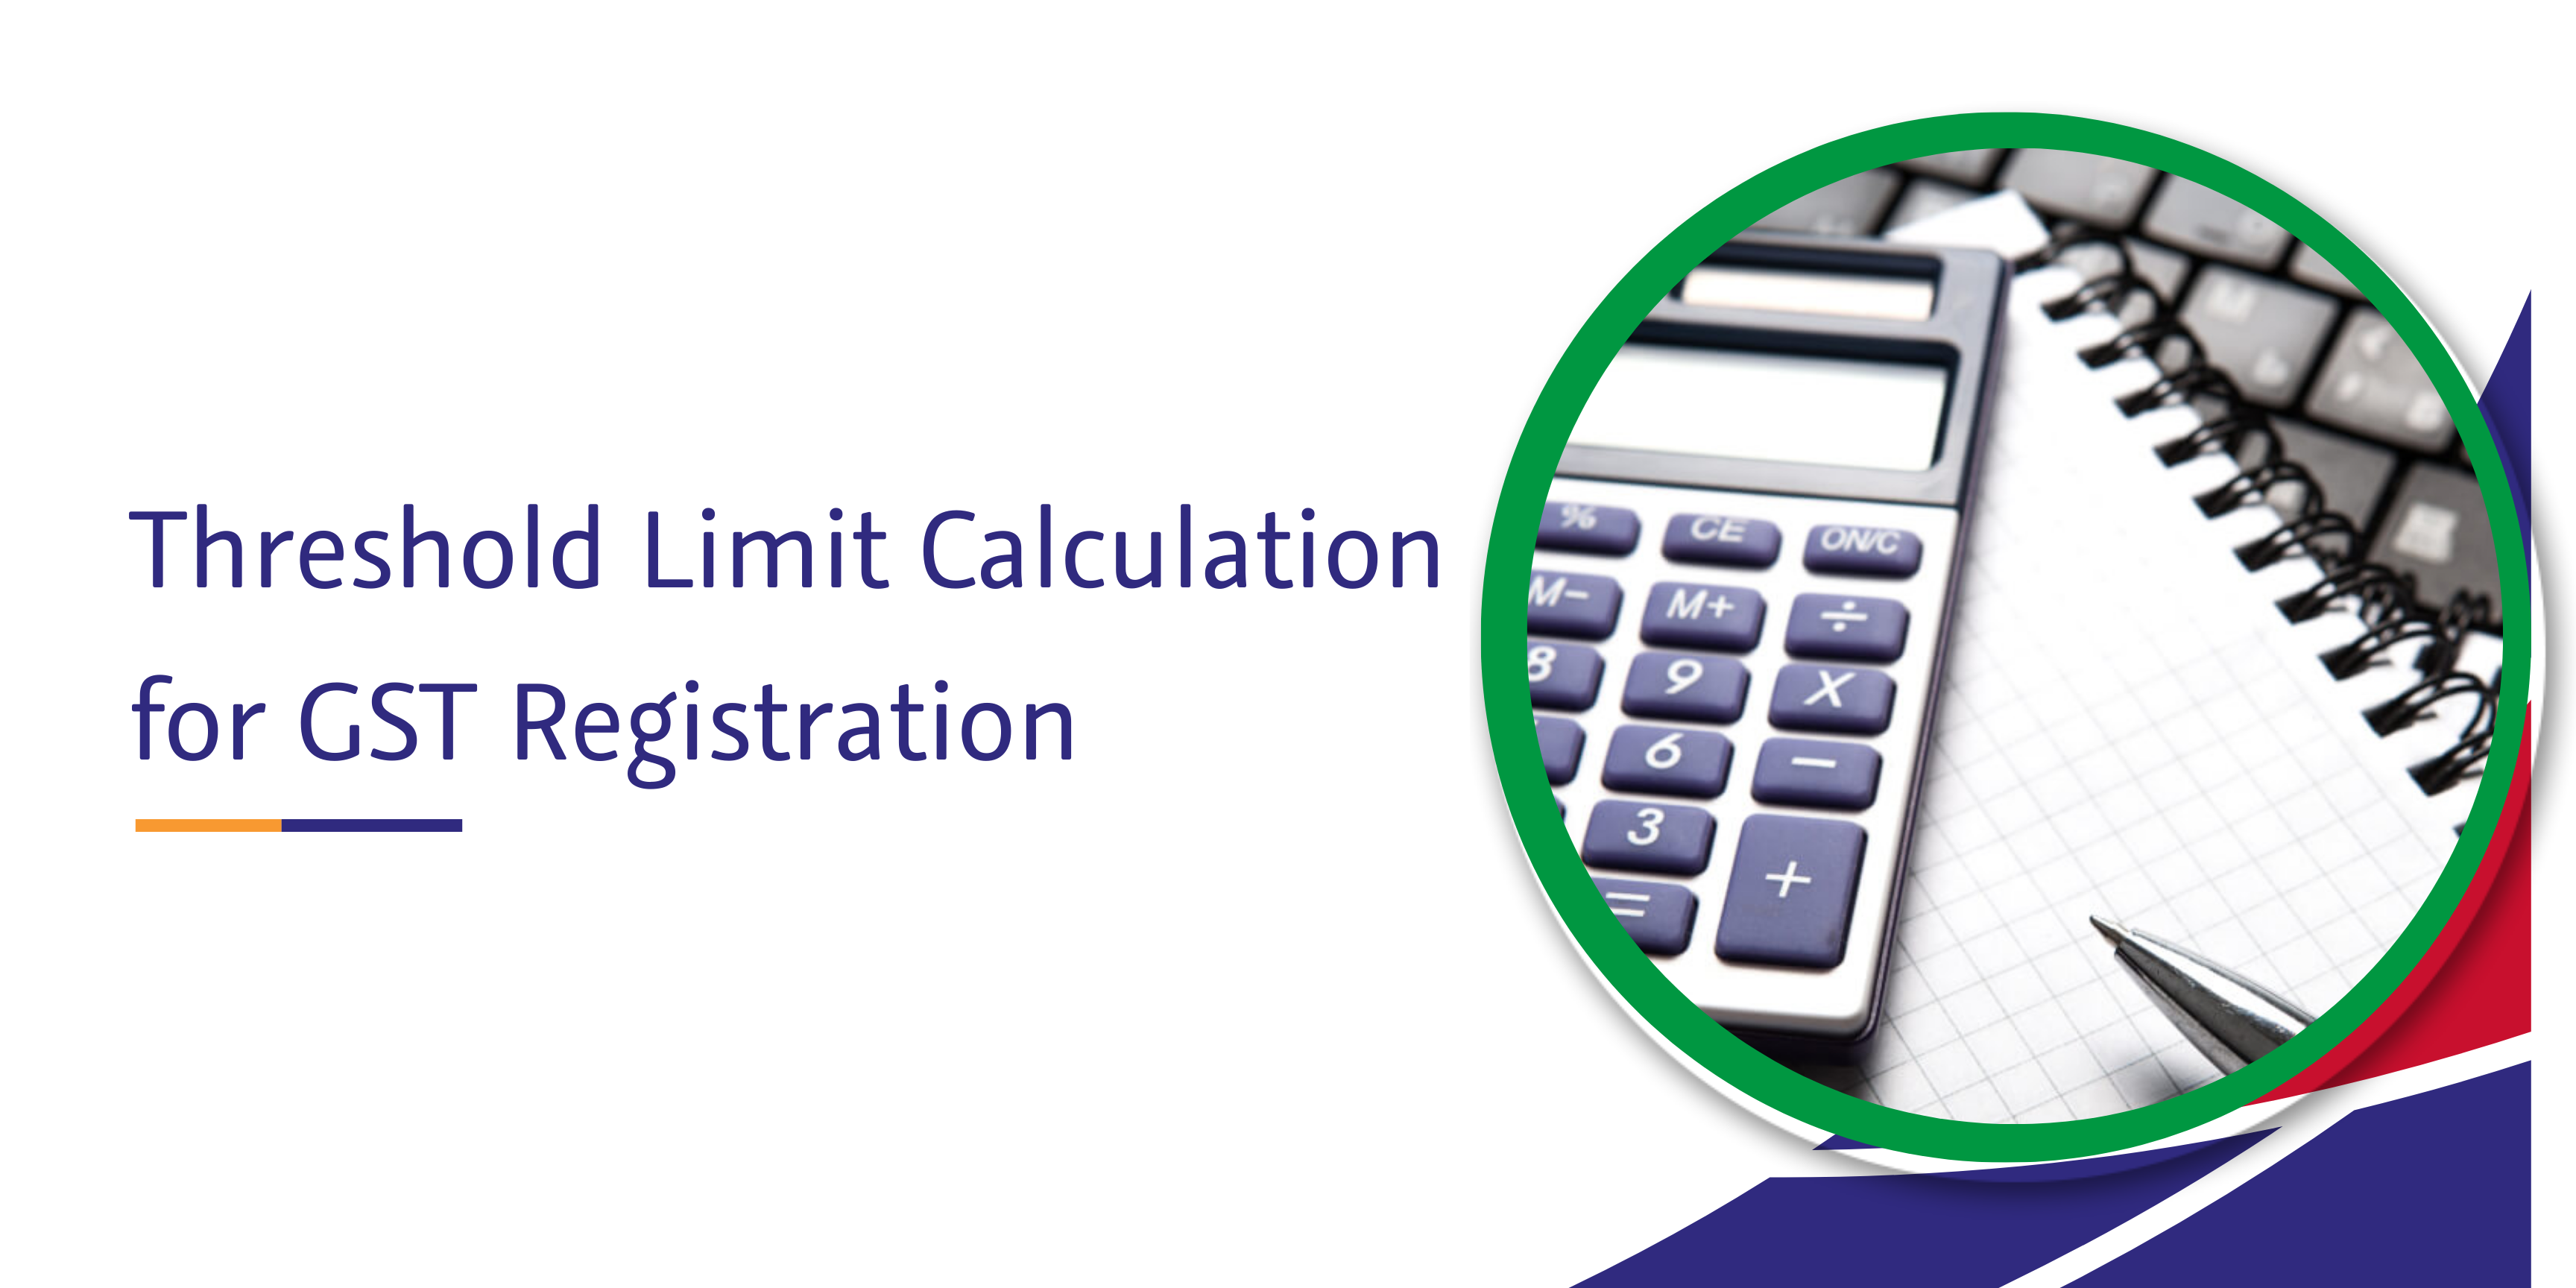 You are currently viewing Threshold Limit Calculation for GST Registration (Other than Composition Scheme)